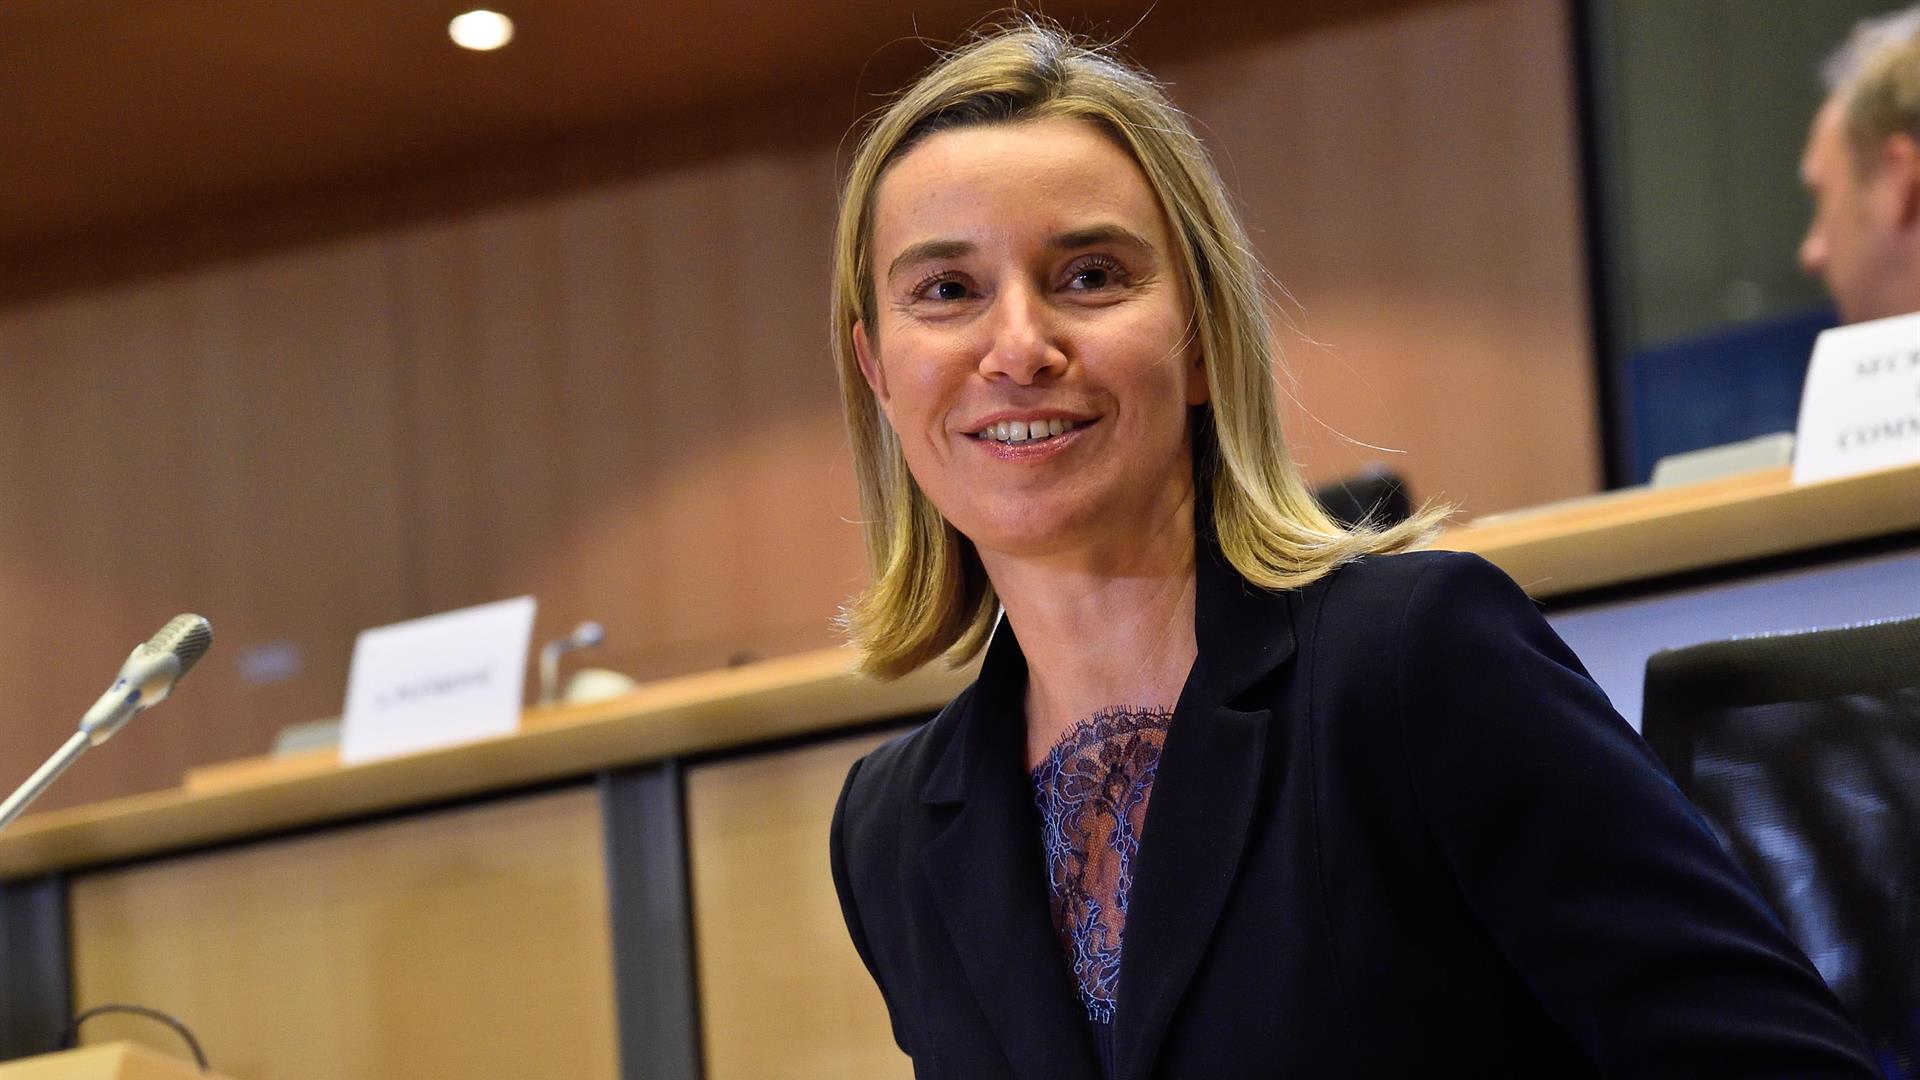 federica-mogherini-eu-foreign-policy-chief-we-need-to-build